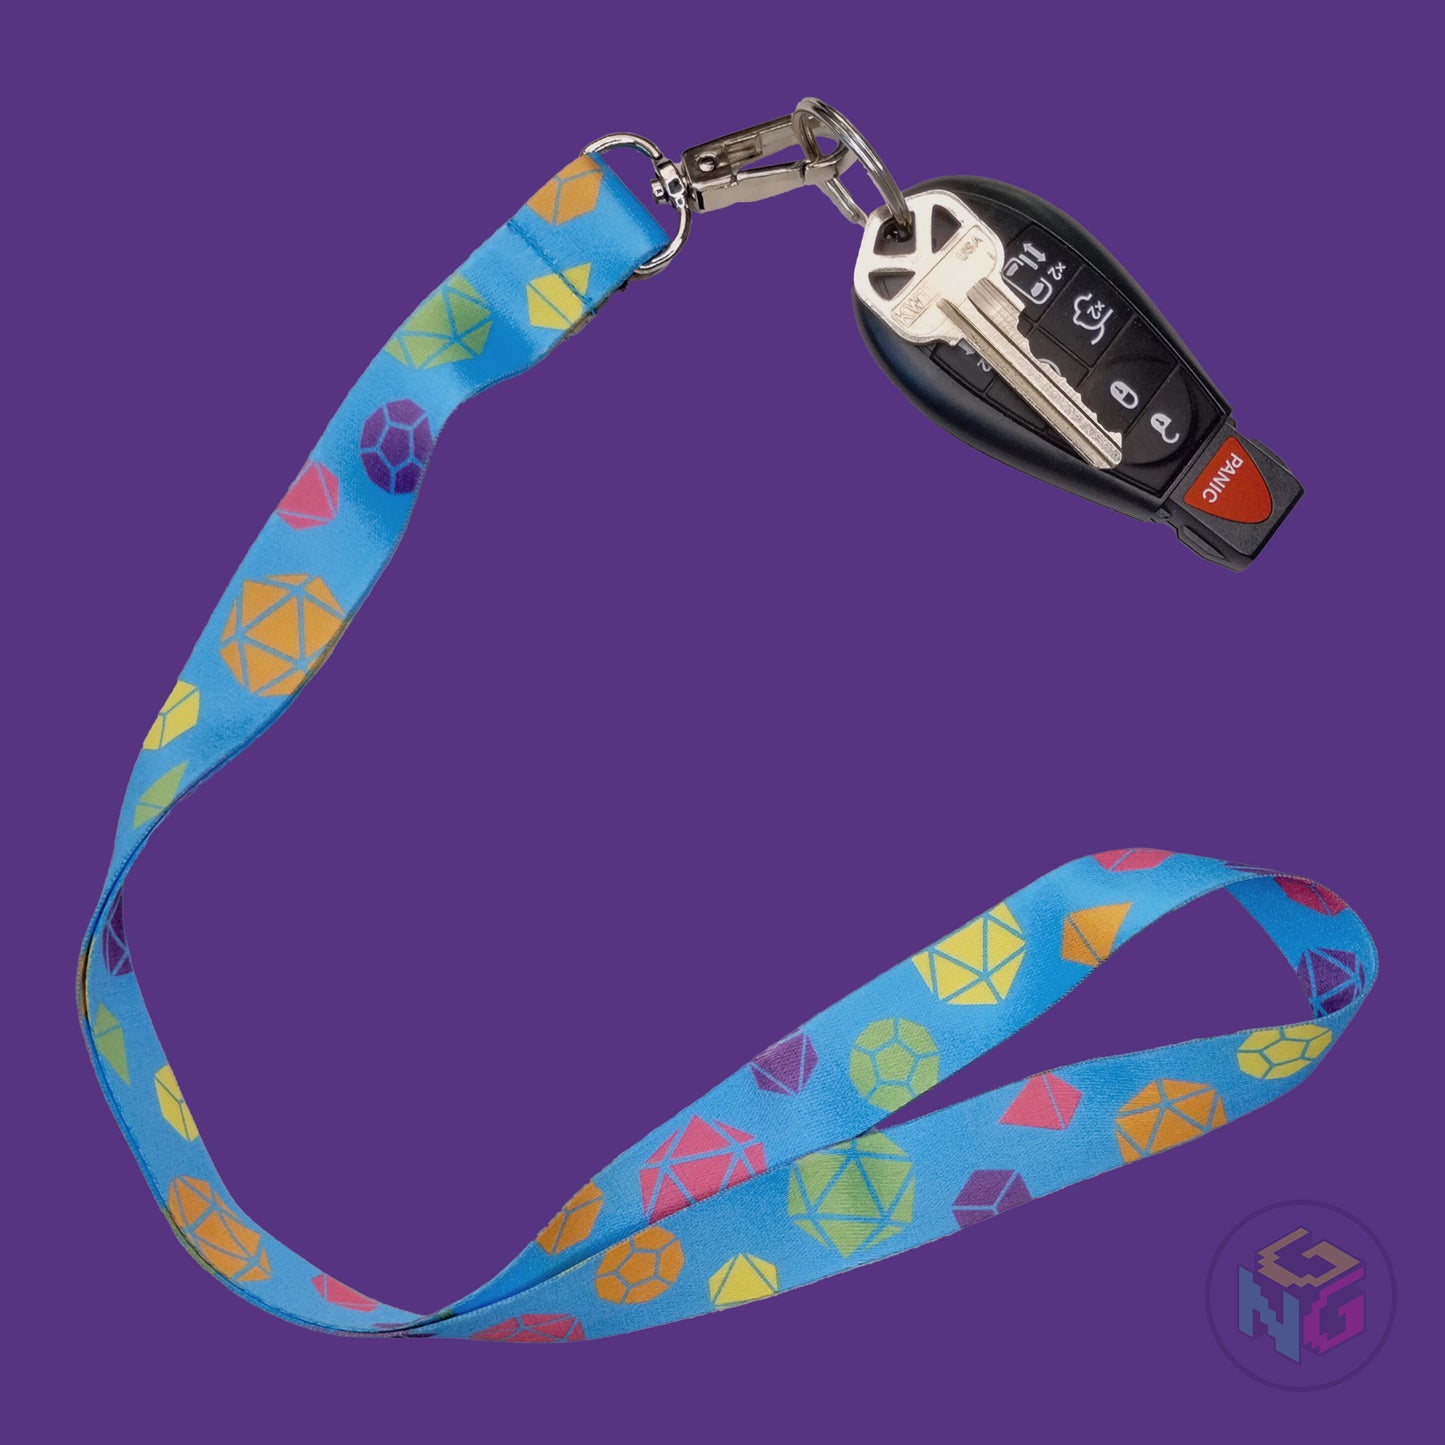 blue dnd rainbow lanyard showing the pink, orange, yellow, green, and purple tabletop dice with a key fob clipped to the end of the lanyard